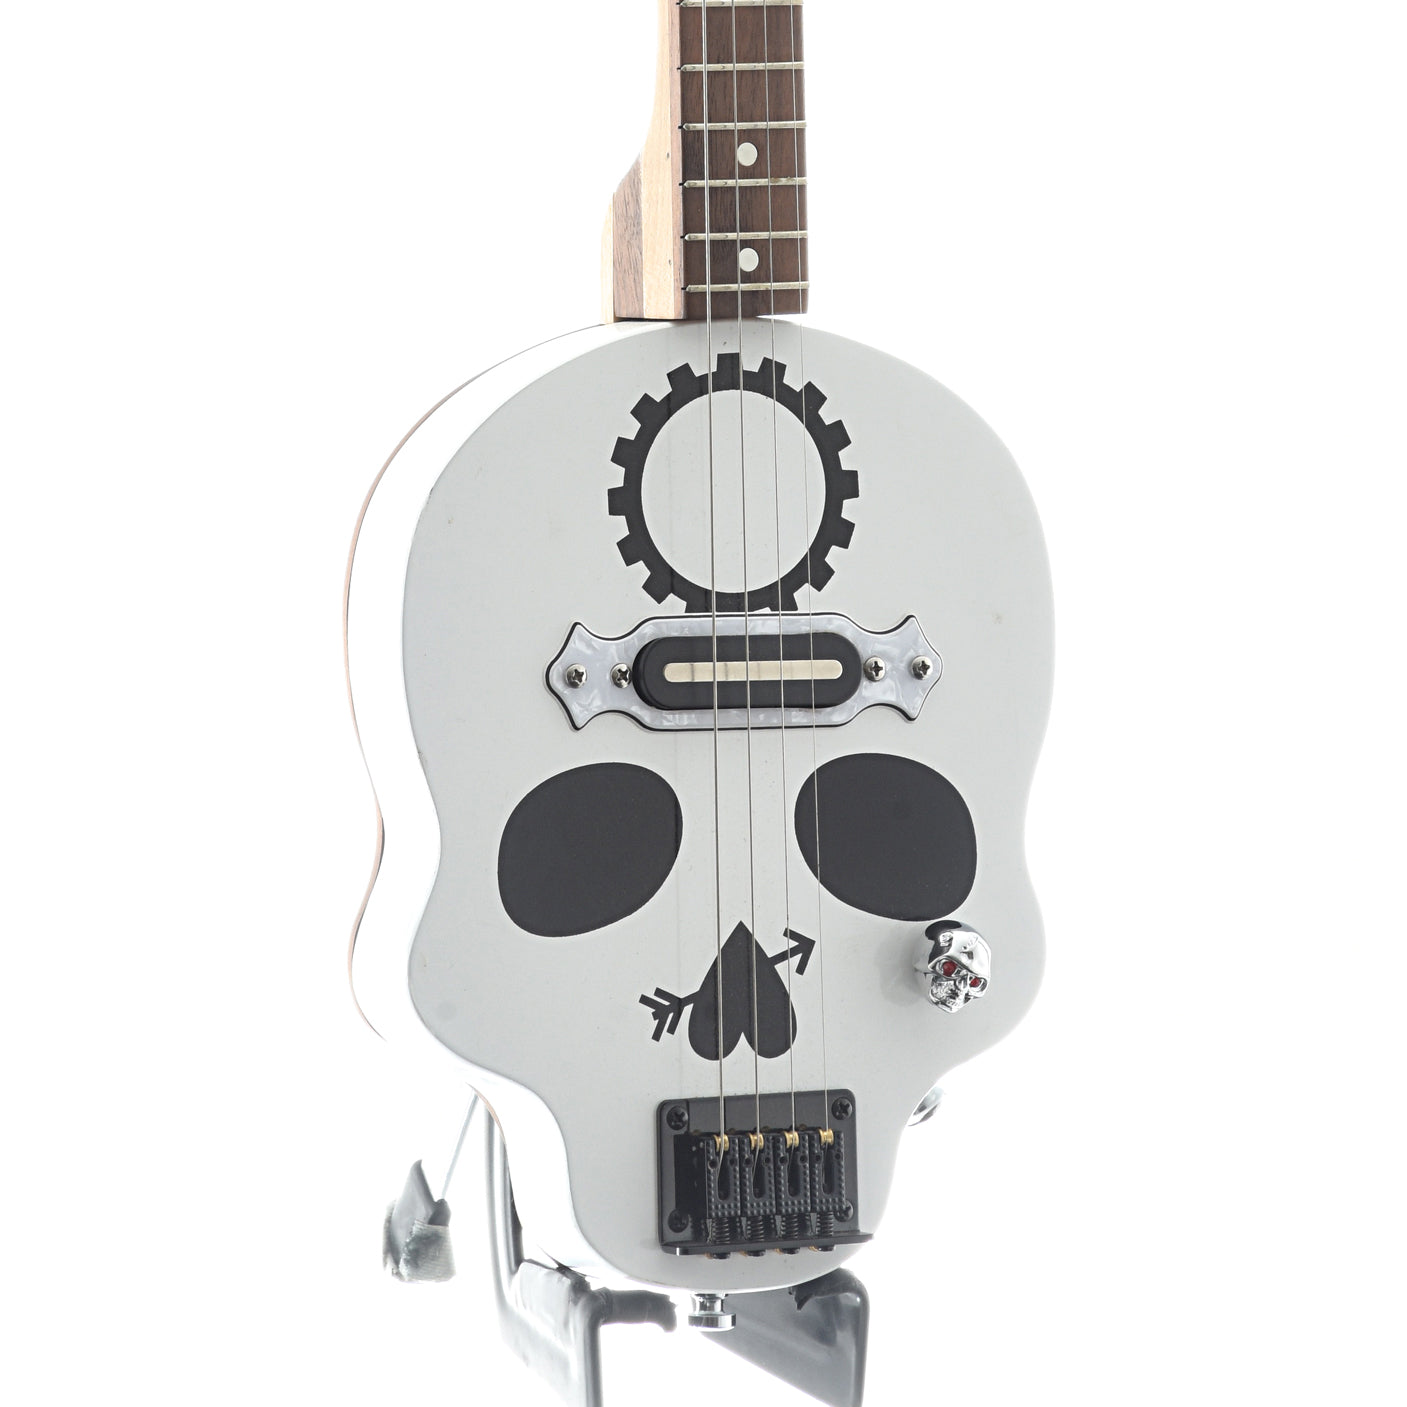 Image 2 of Get Down Guitars White Skull Cigar Box 4-String Electric Guitar - SKU# GDGSK4 : Product Type Solid Body Electric Guitars : Elderly Instruments